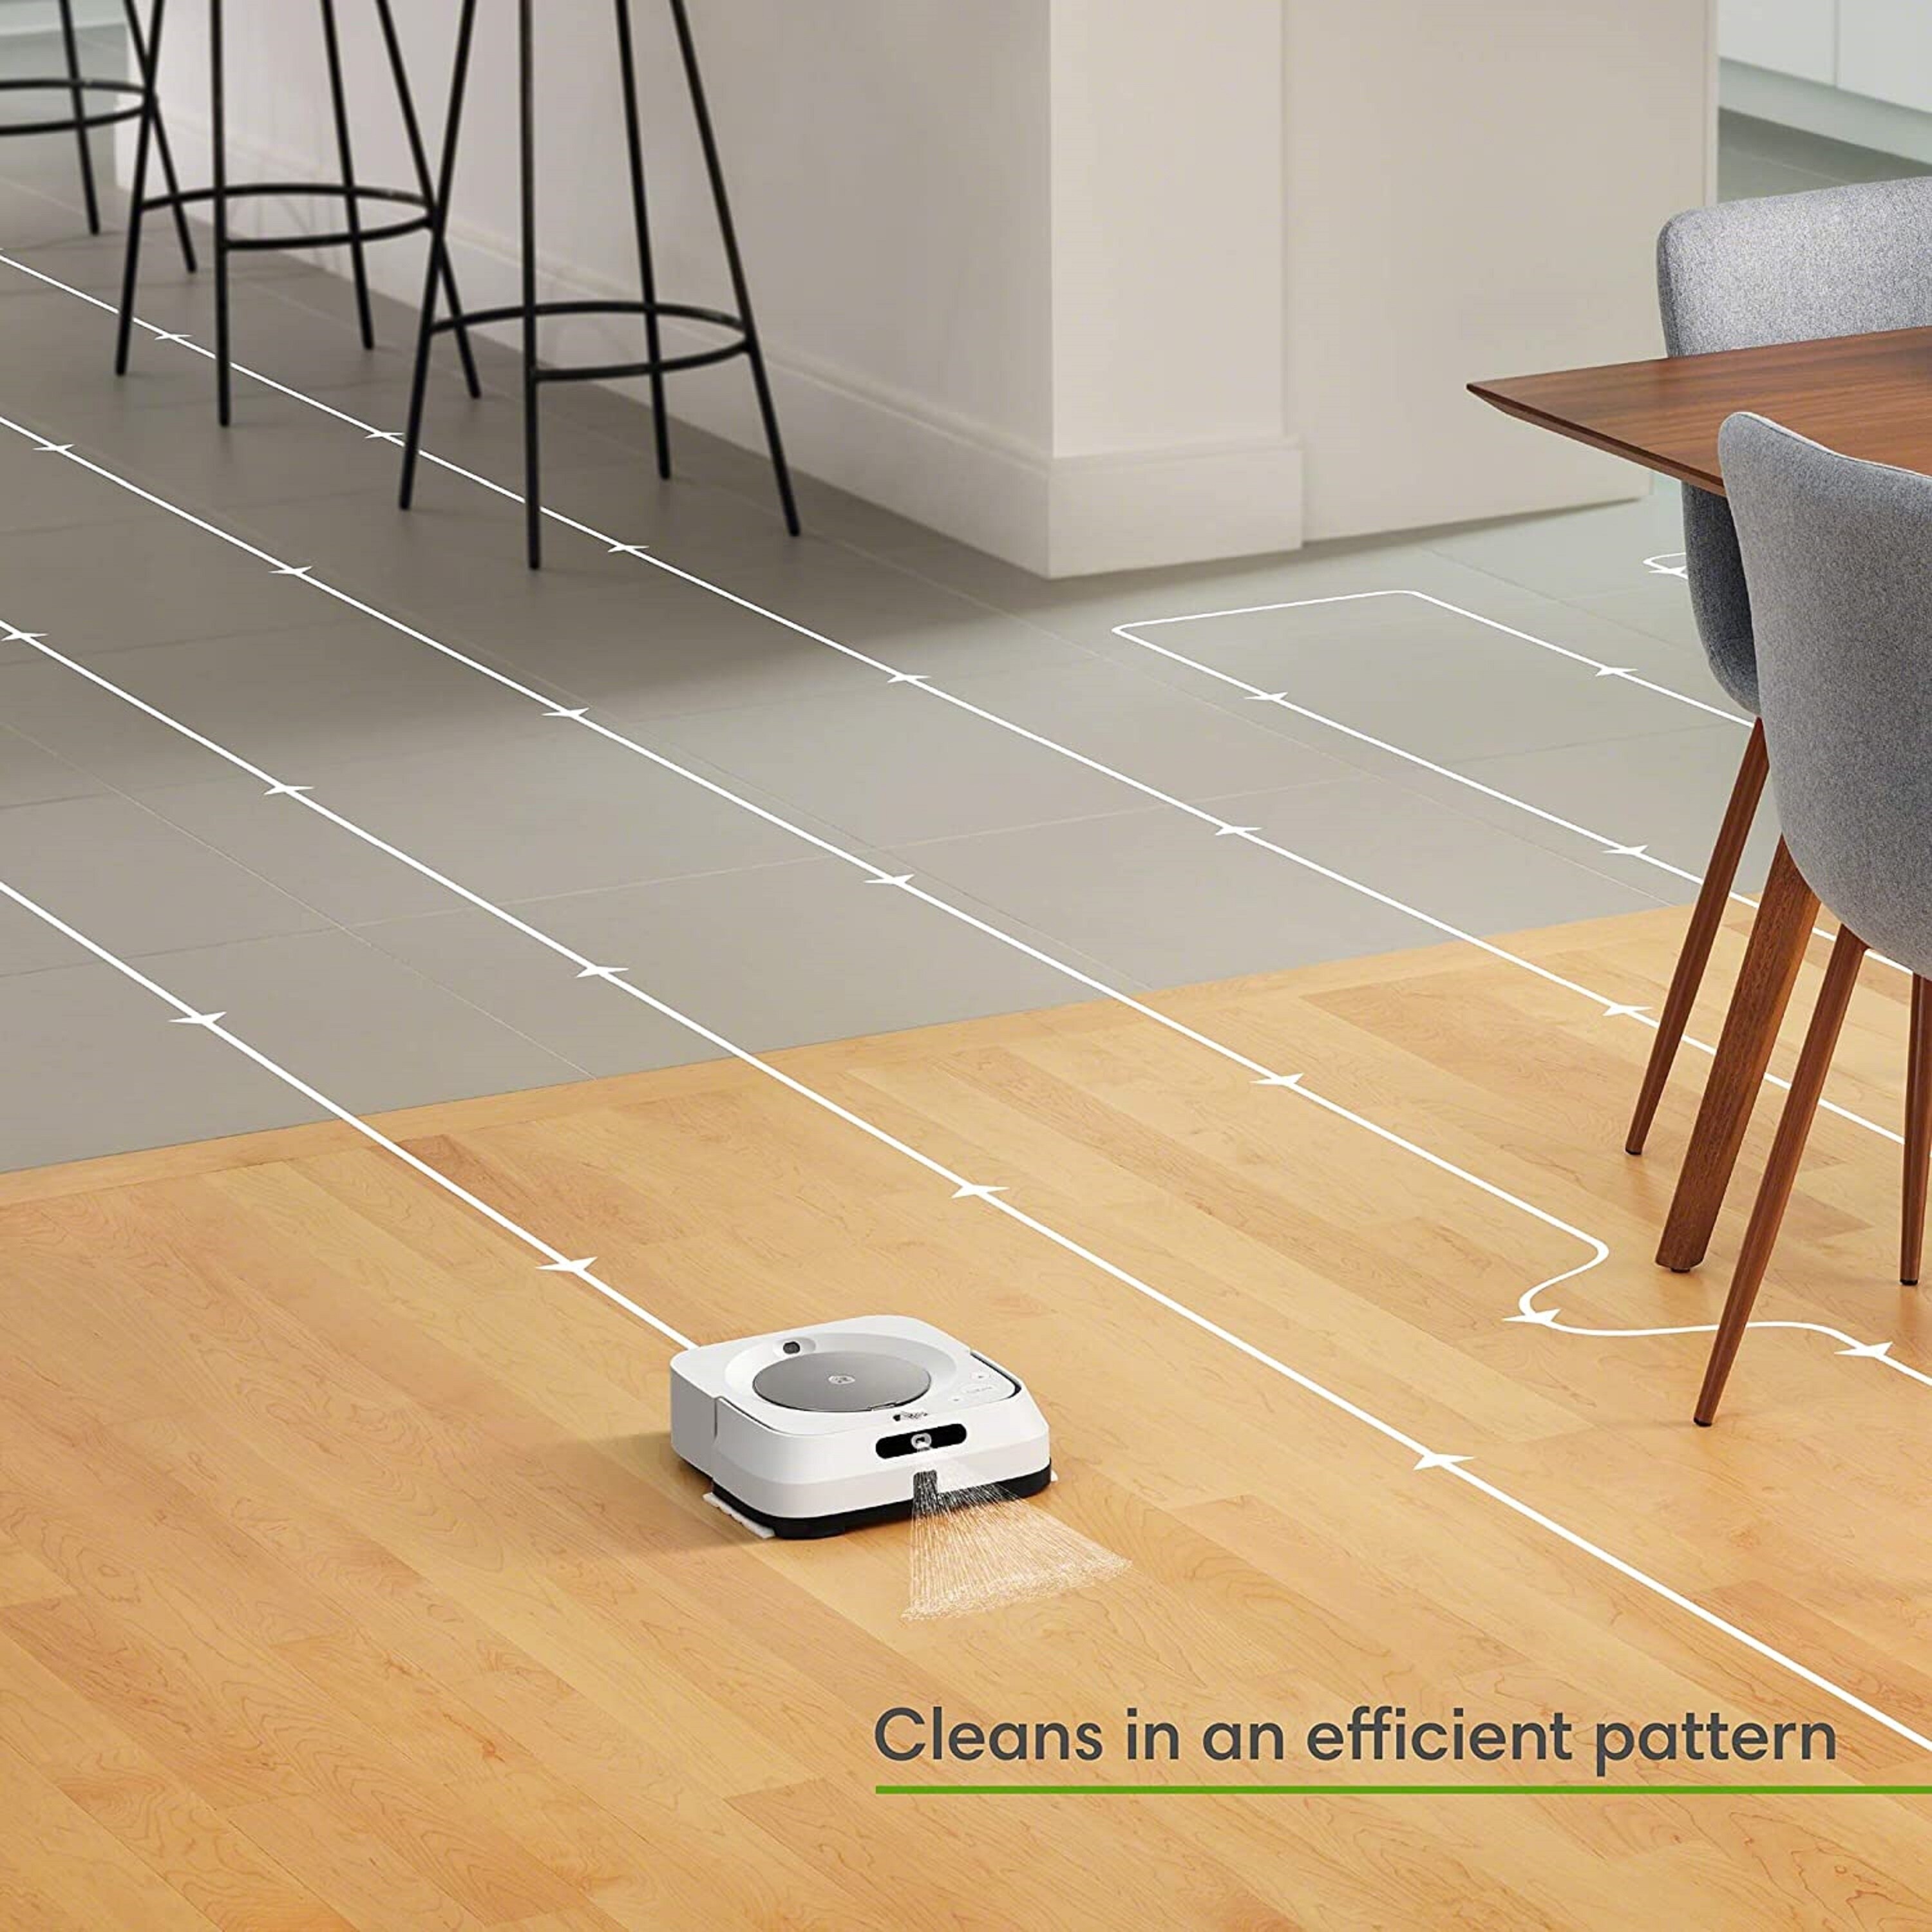 Creative K iRobot Braava 380t Advanced Robot Mop- Wet Mopping and Dry  Sweeping Cleaning Modes, Large Spaces - 7'6